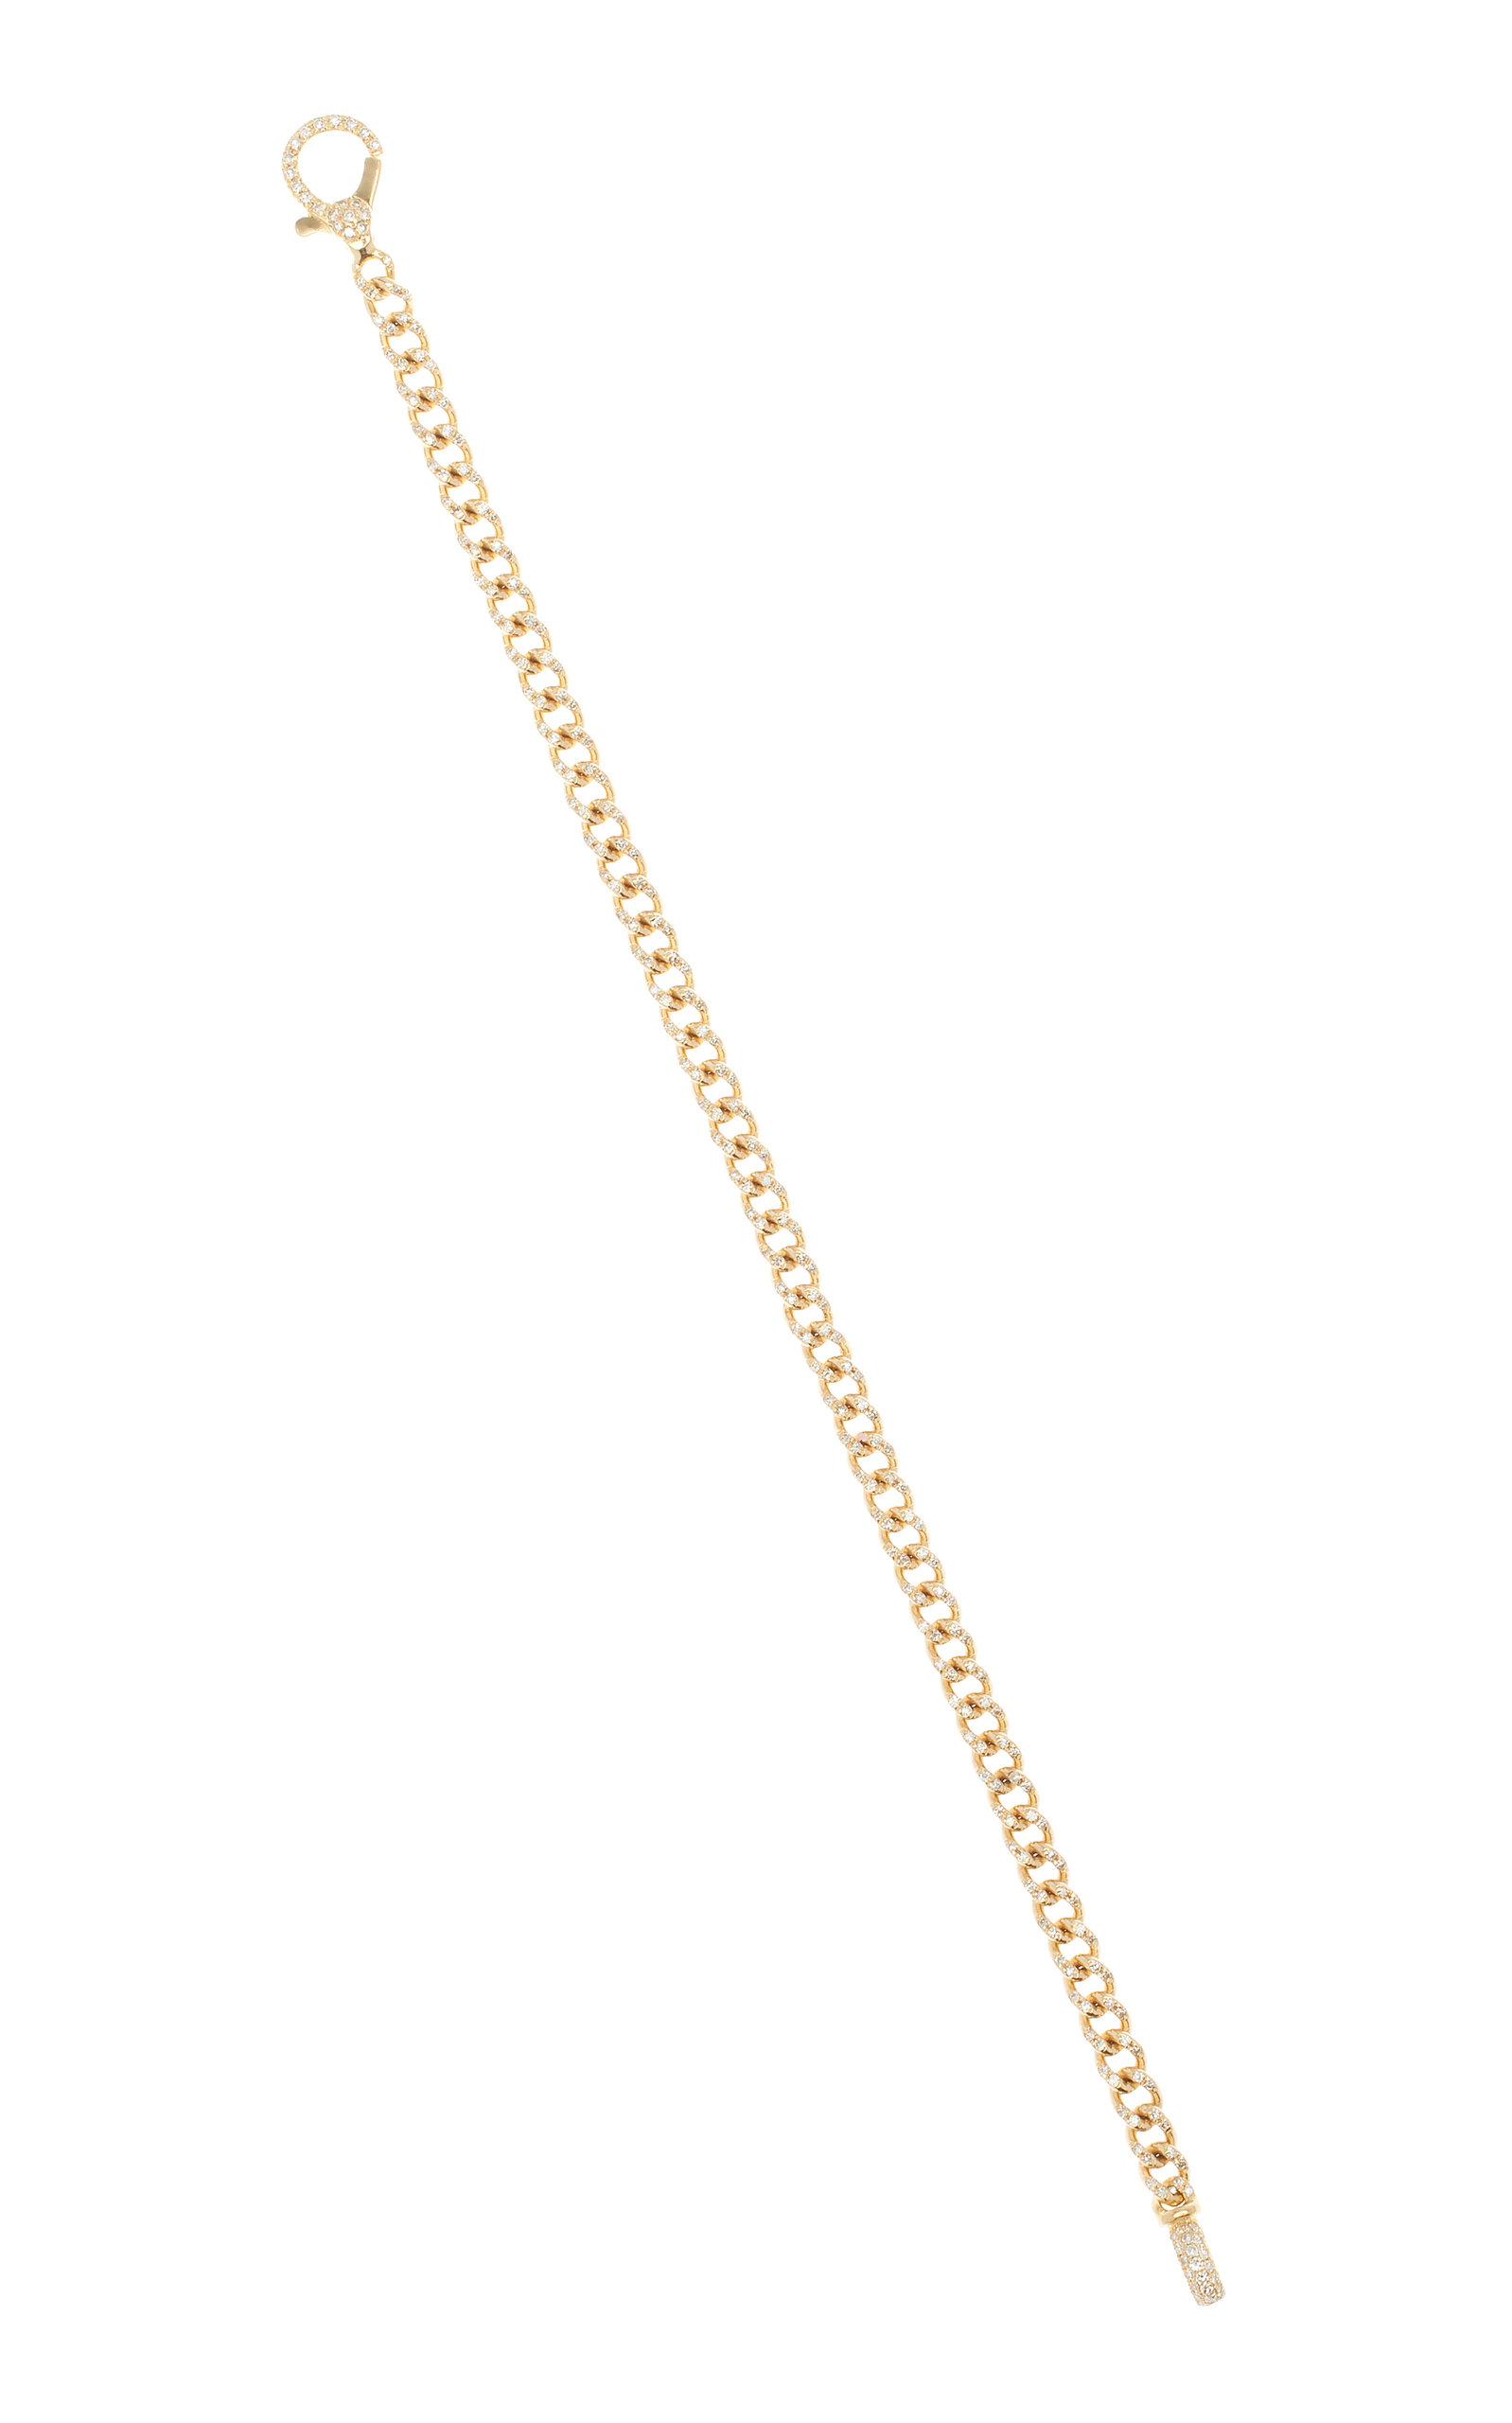 SHAY - Baby 18K Yellow Gold Diaond Link Bracelet - Gold - OS - Moda Operandi - Gifts For Her